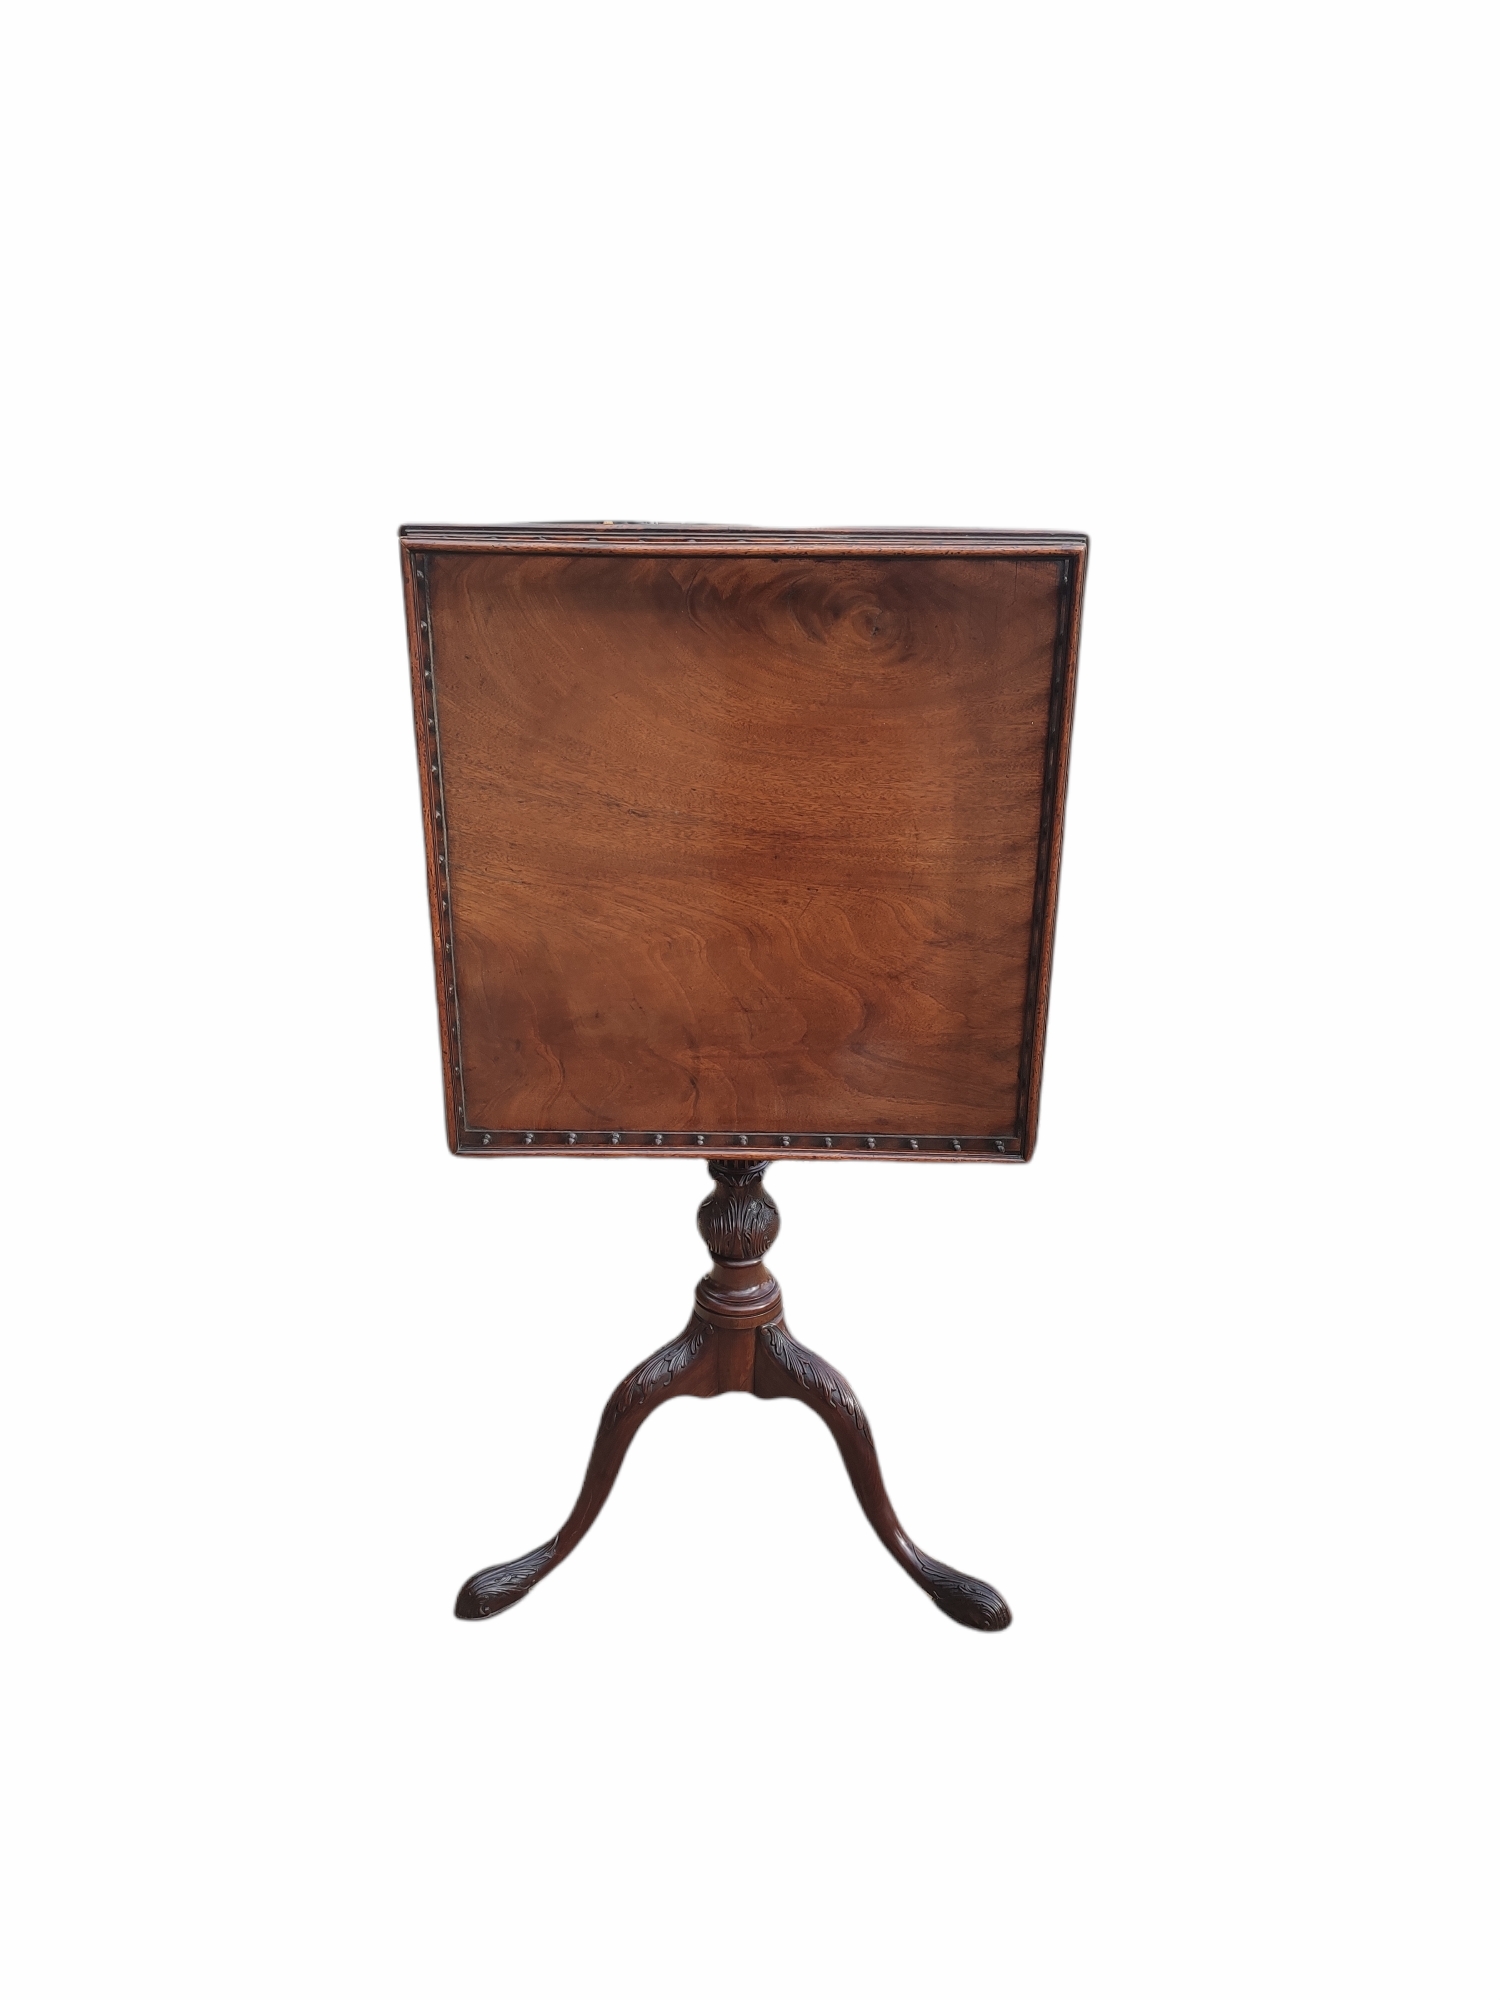 AN 18TH CENTURY MAHOGANY TILT TOP TRIPOD TABLE With square spindles galleried top above a bird cage, - Image 3 of 3